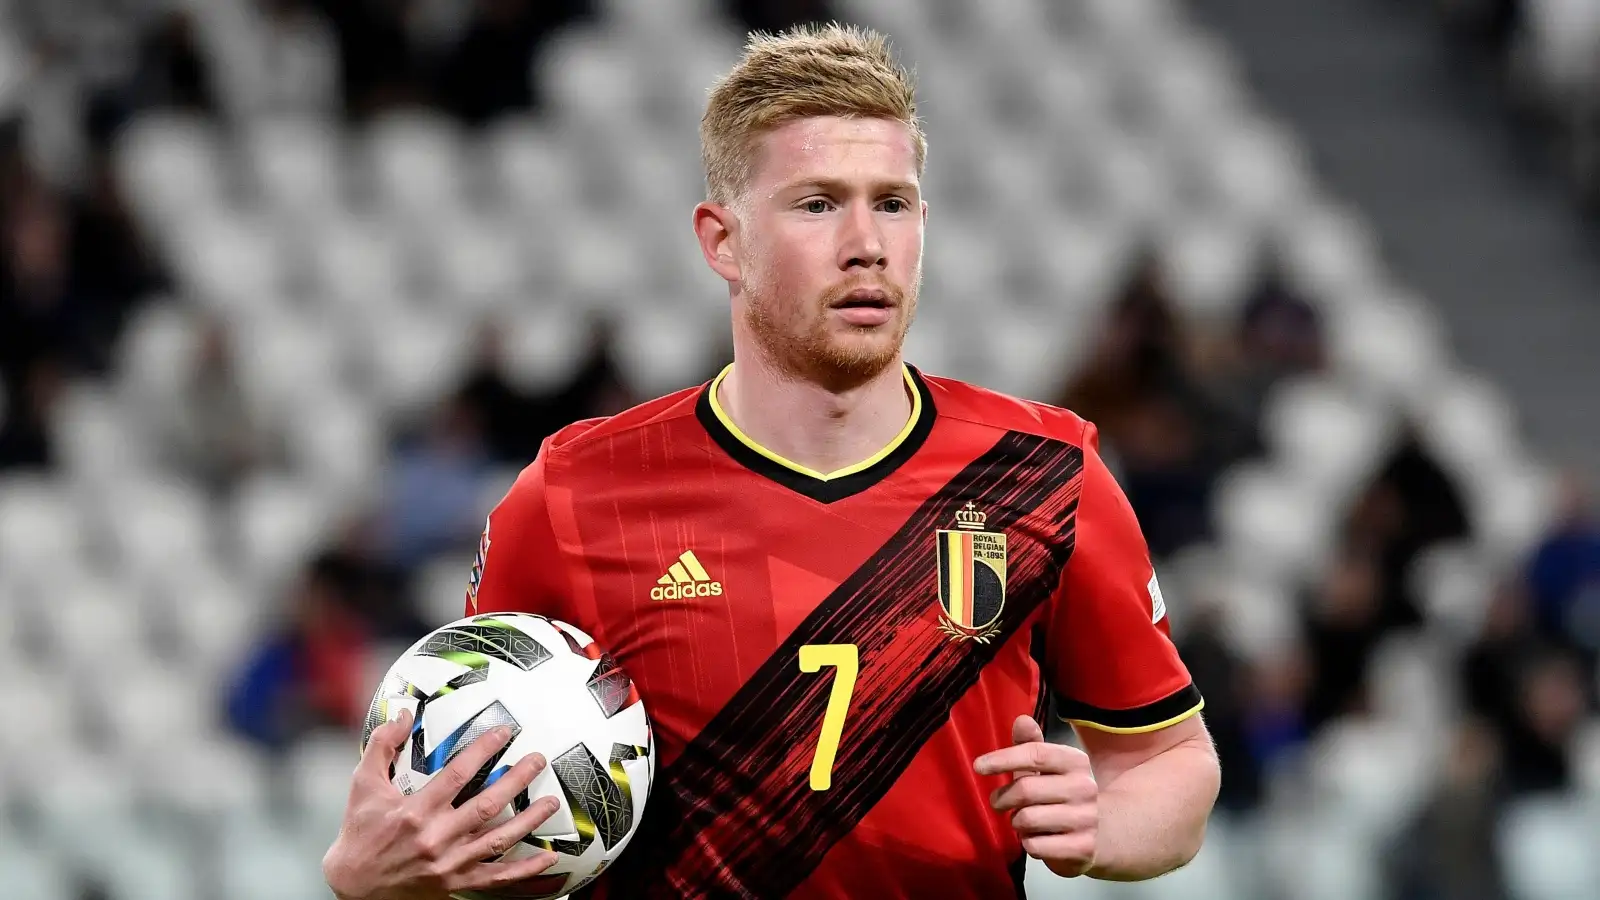 Kevin De Bruyne during a match